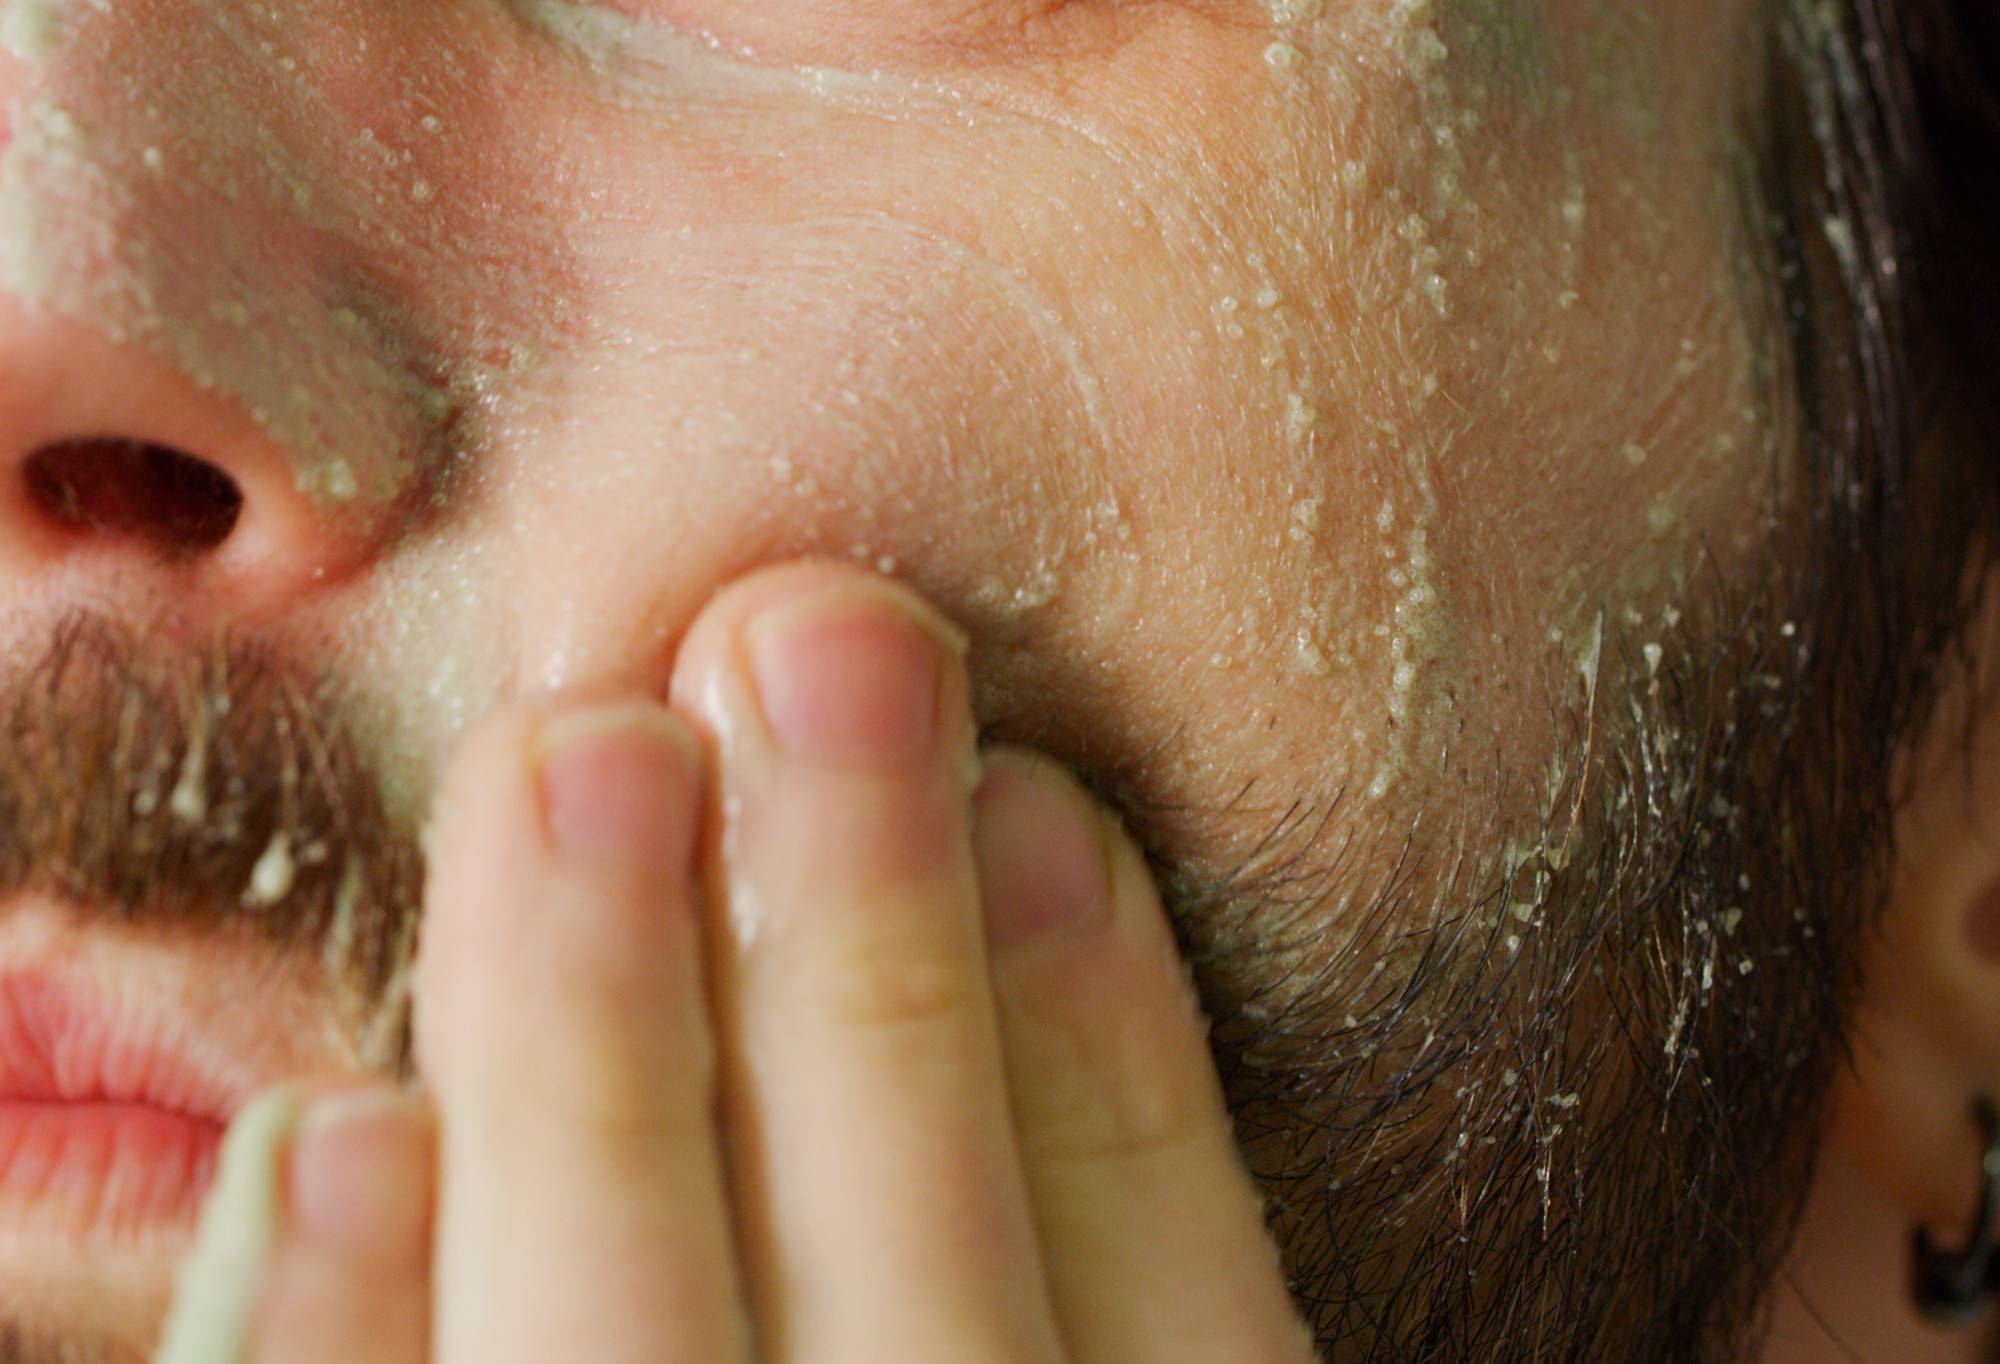 A bearded face is covered in a thin, light green paste with sugar crystals being rubbed into the lower cheek area.